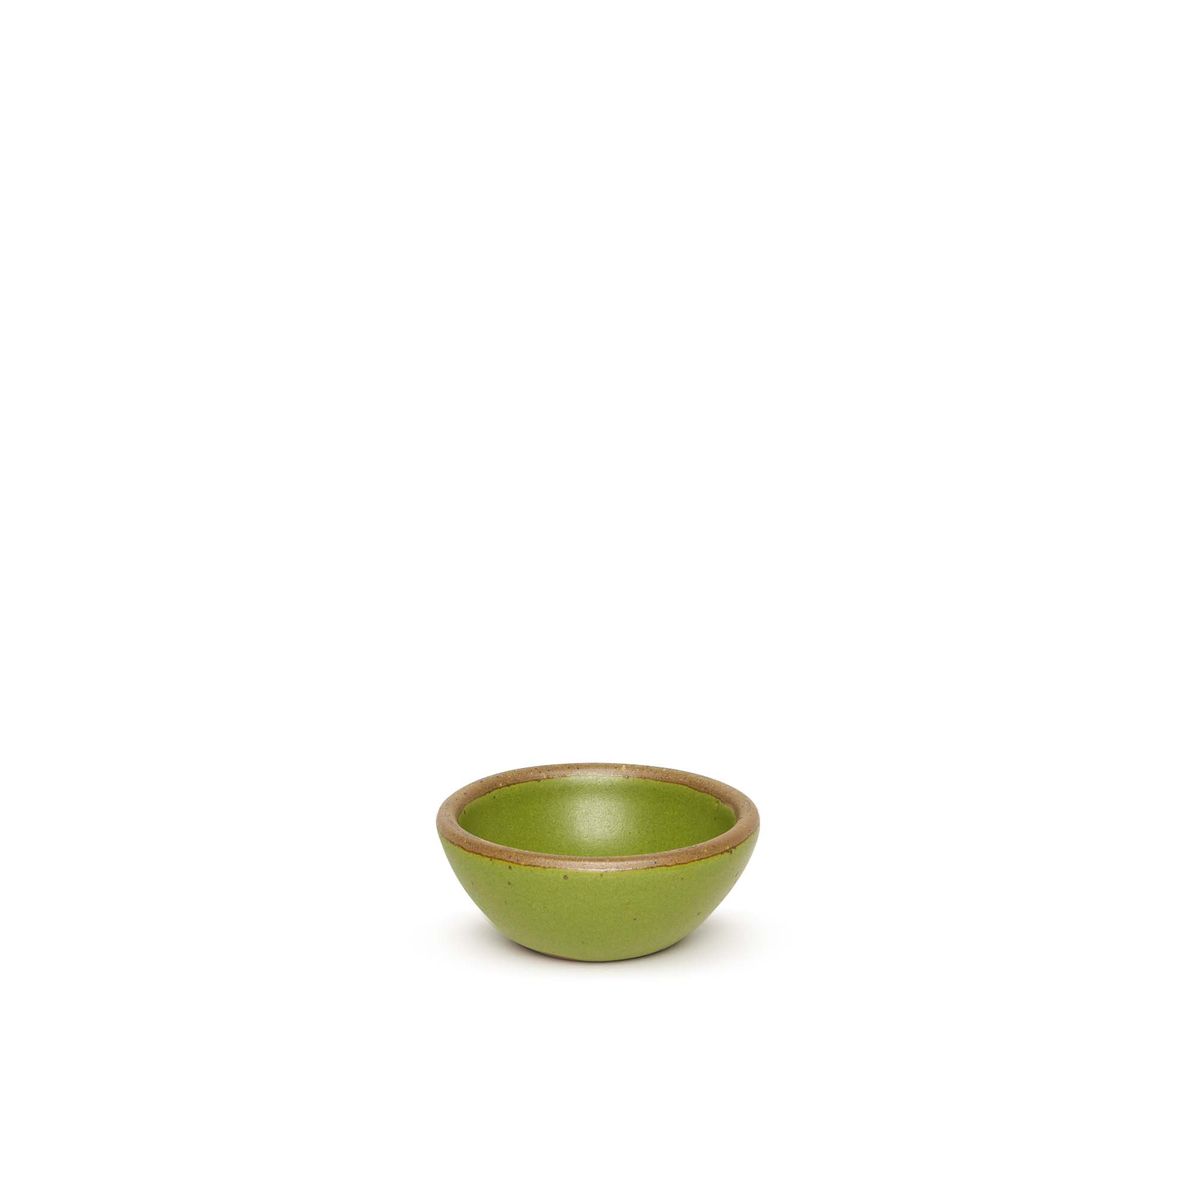 A mossy green bowl that could fit in the palm of your hand.